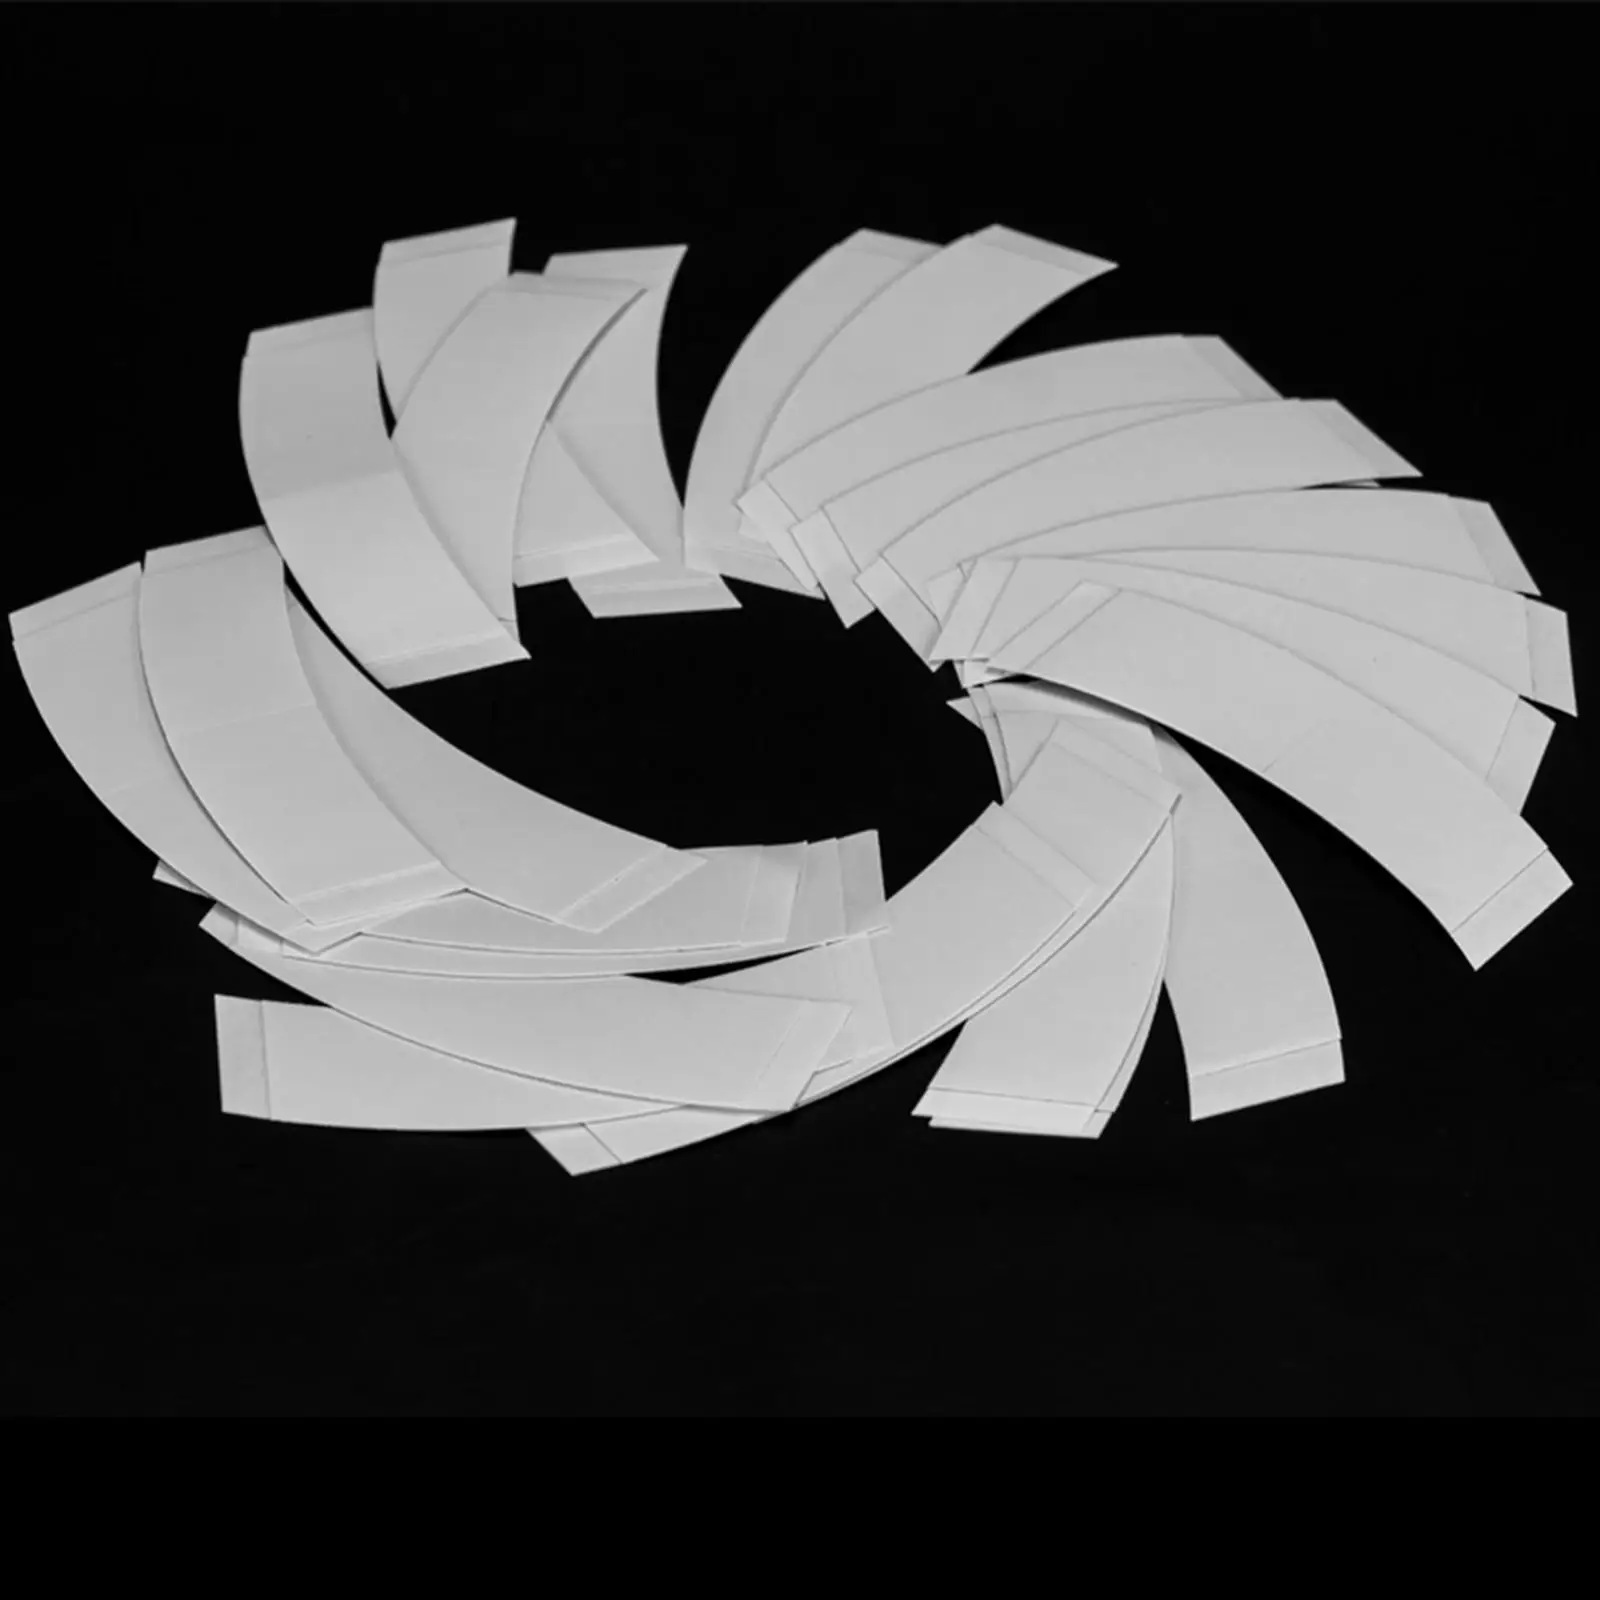 36 Pieces Hair Tape Waterproof, C-Shaped, Double Sided, Strong , Thin  Tape, for Laces Hair Pieces Toupees